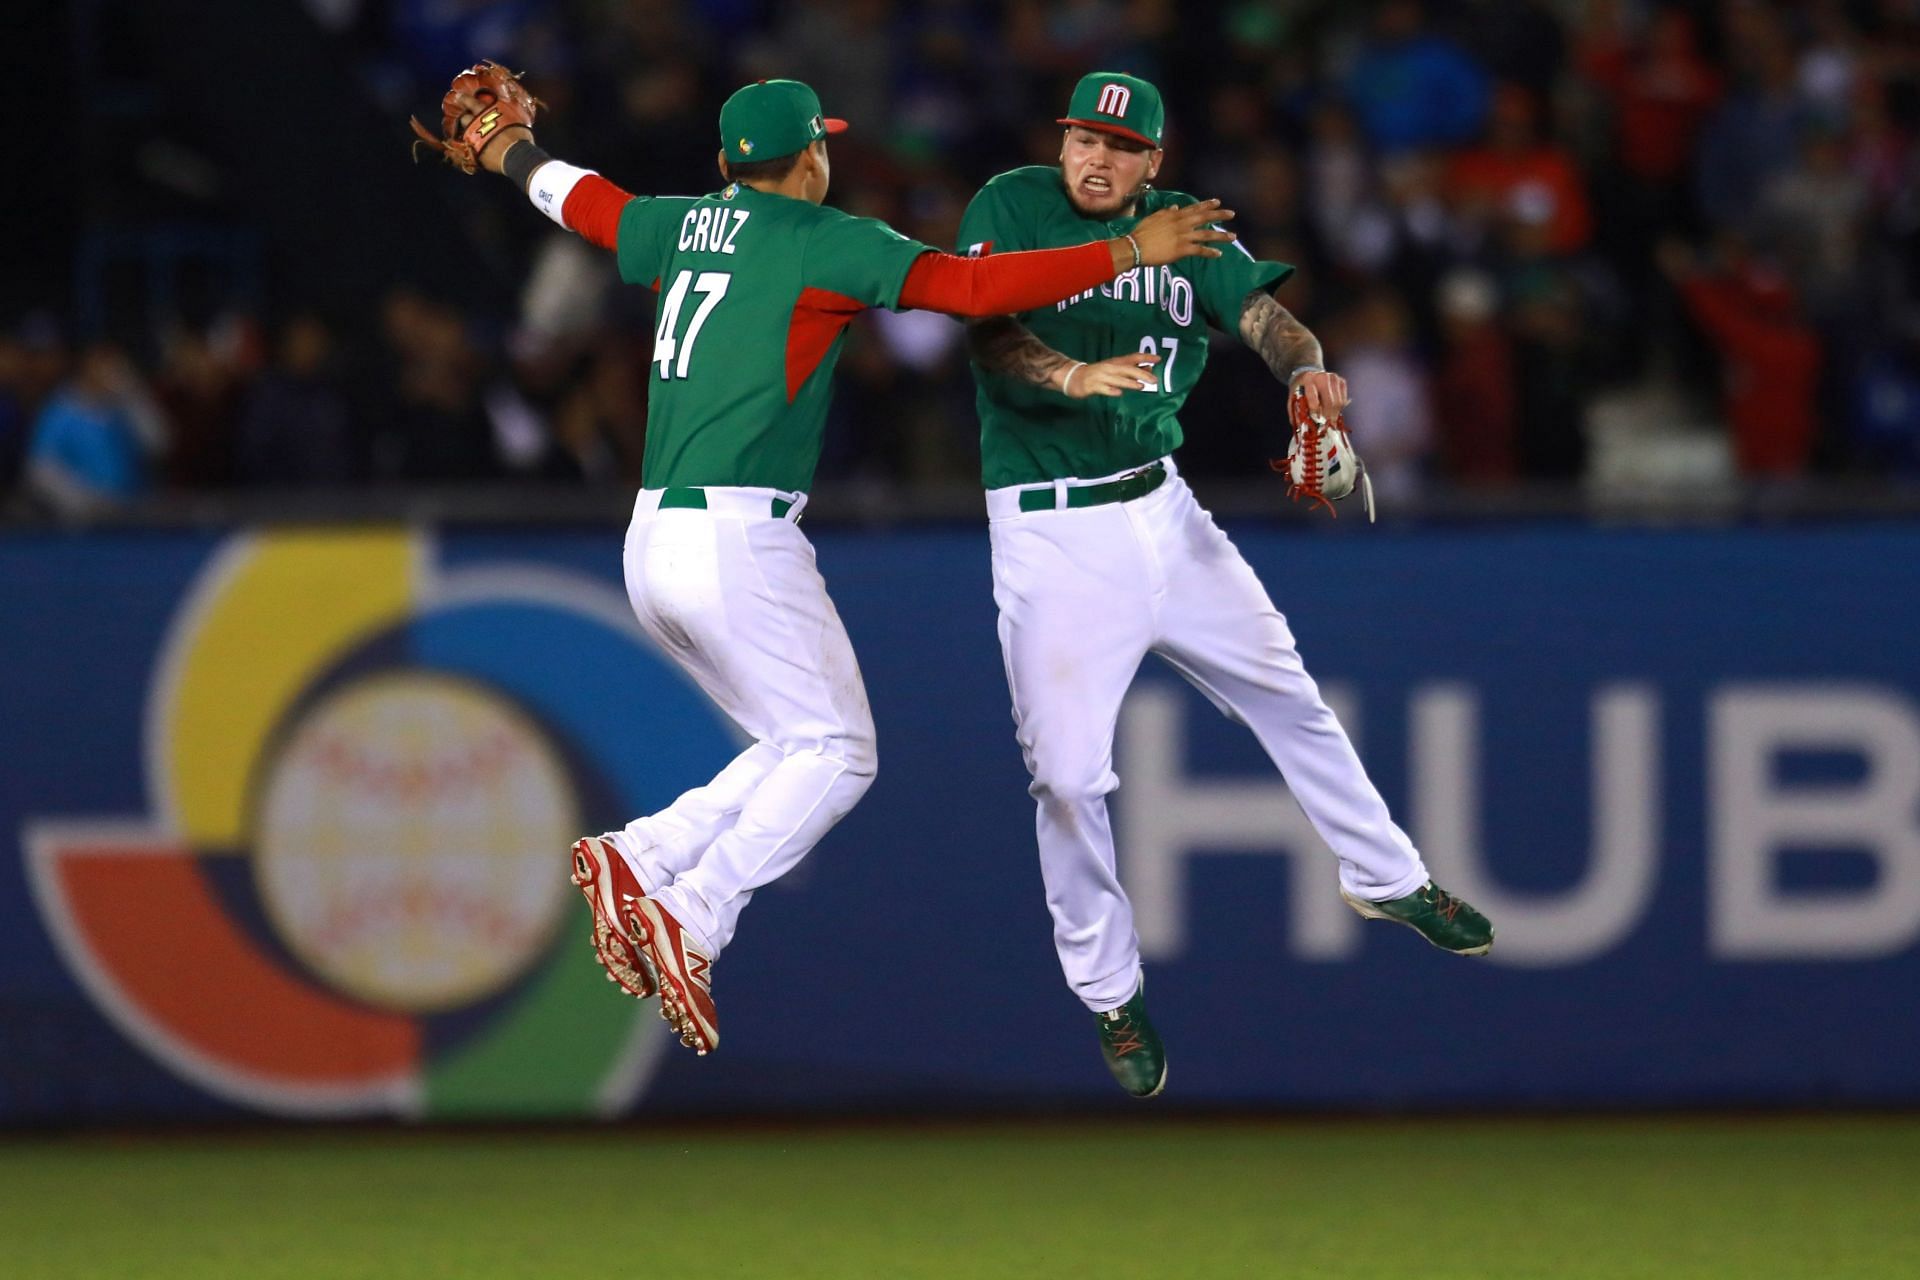 Mexico stuns U.S. in front of Chase Field World Baseball Classic